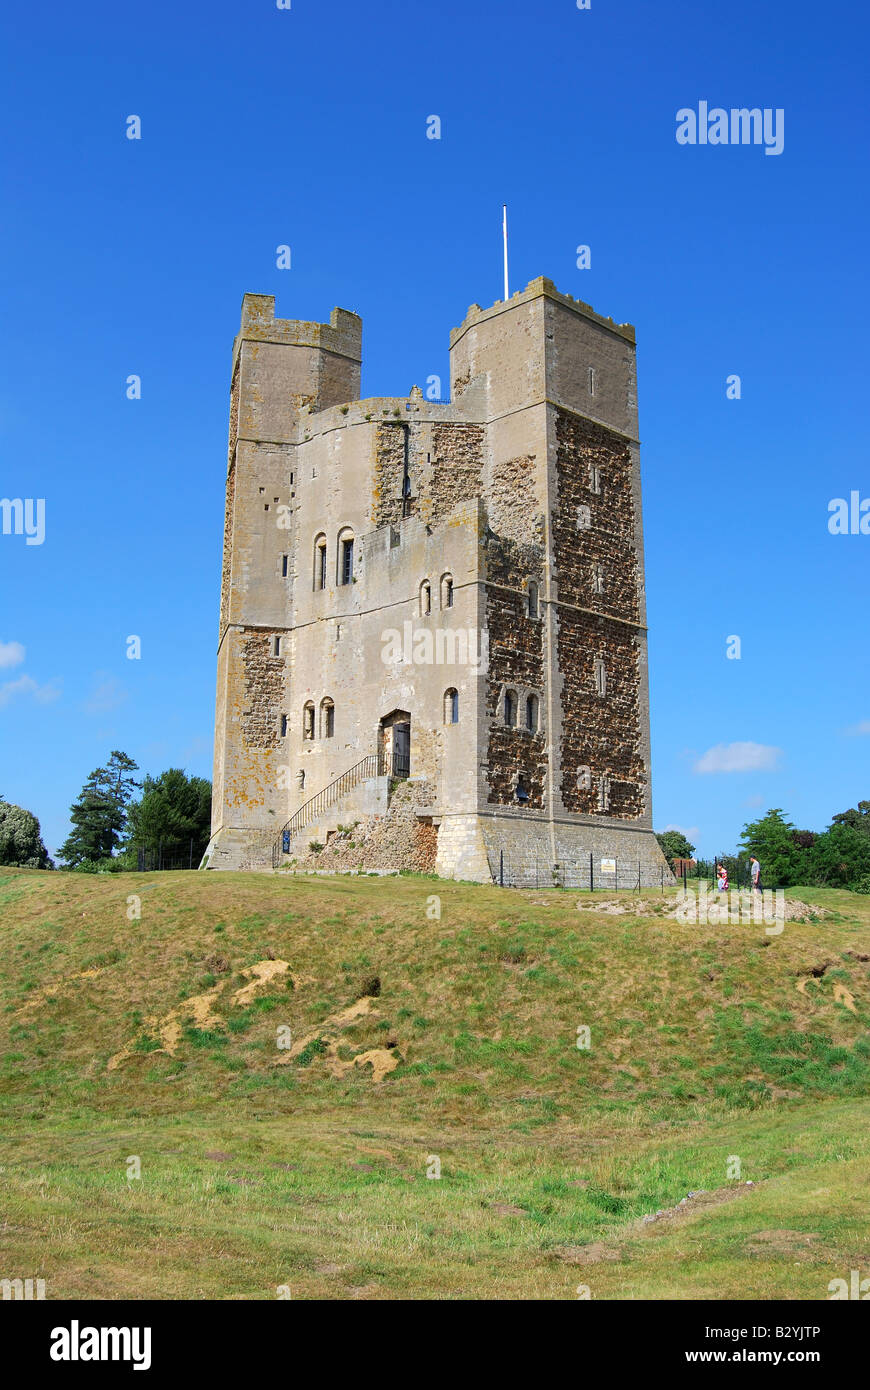 The Keep of Orford Castle, Orford, Suffolk, England, United Kingdom Stock Photo